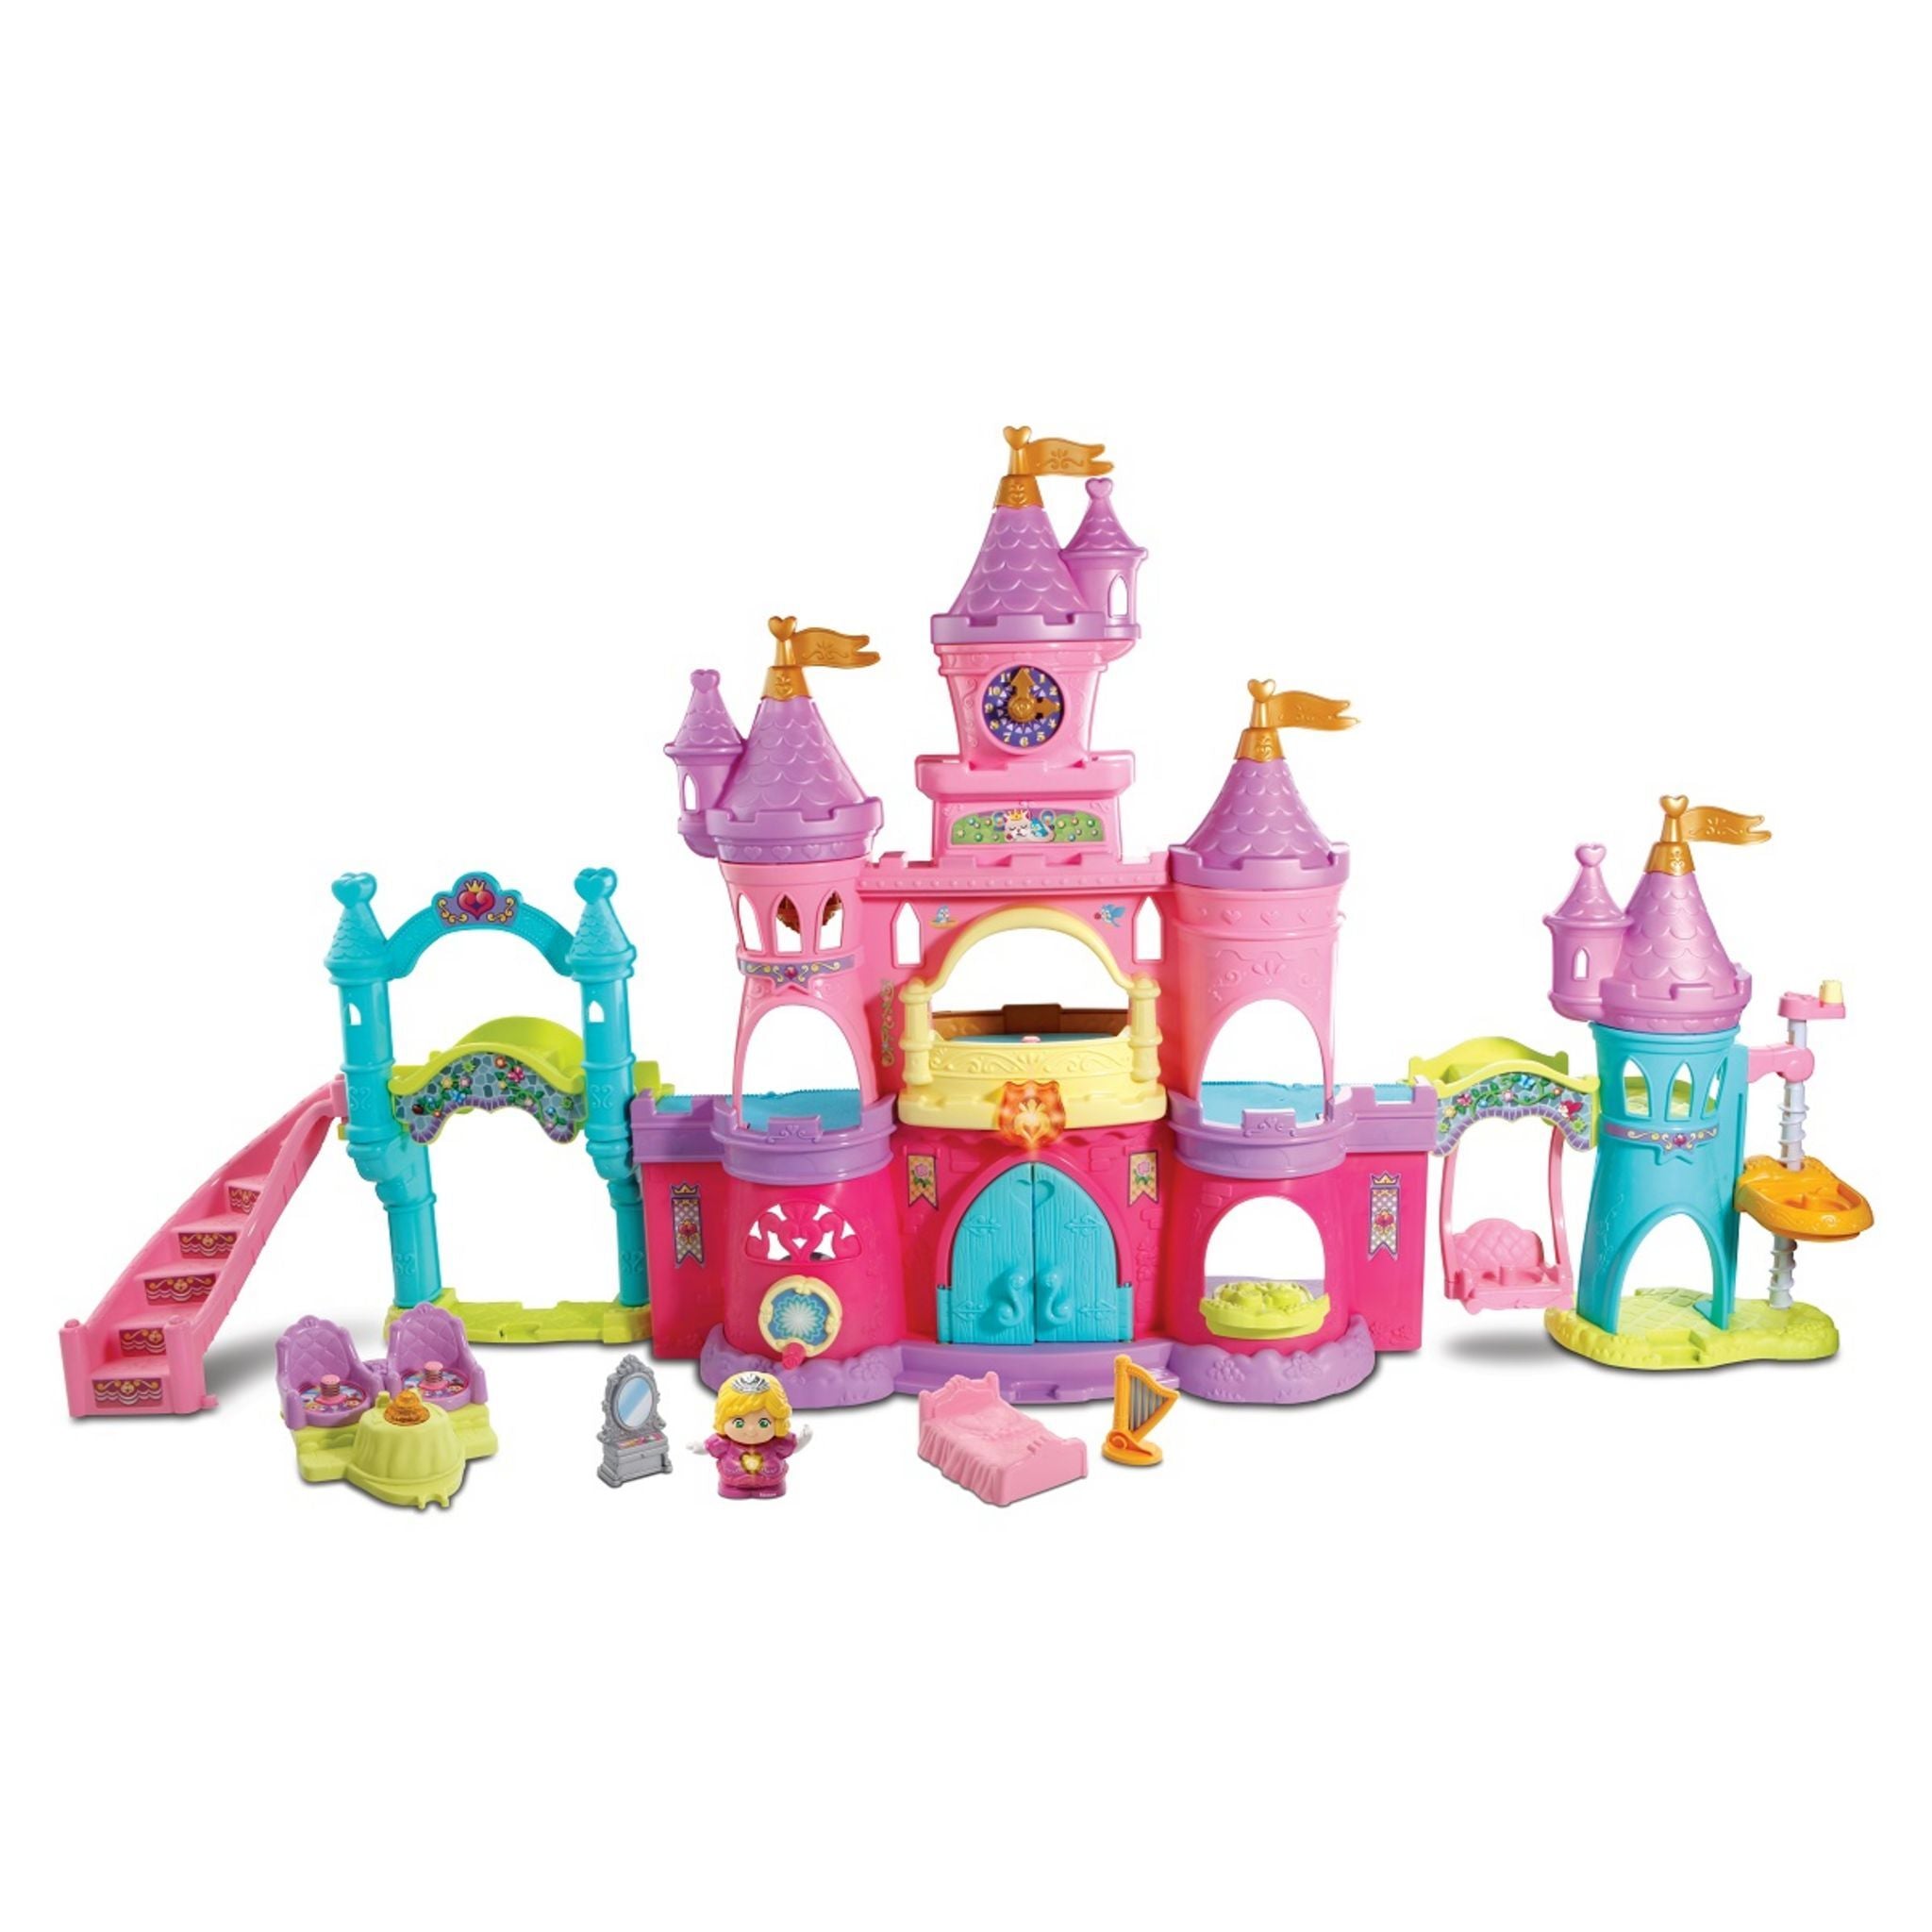 Vtech Tut Tut Copains The Magic Castle Of The Enchanted Kingdom - French